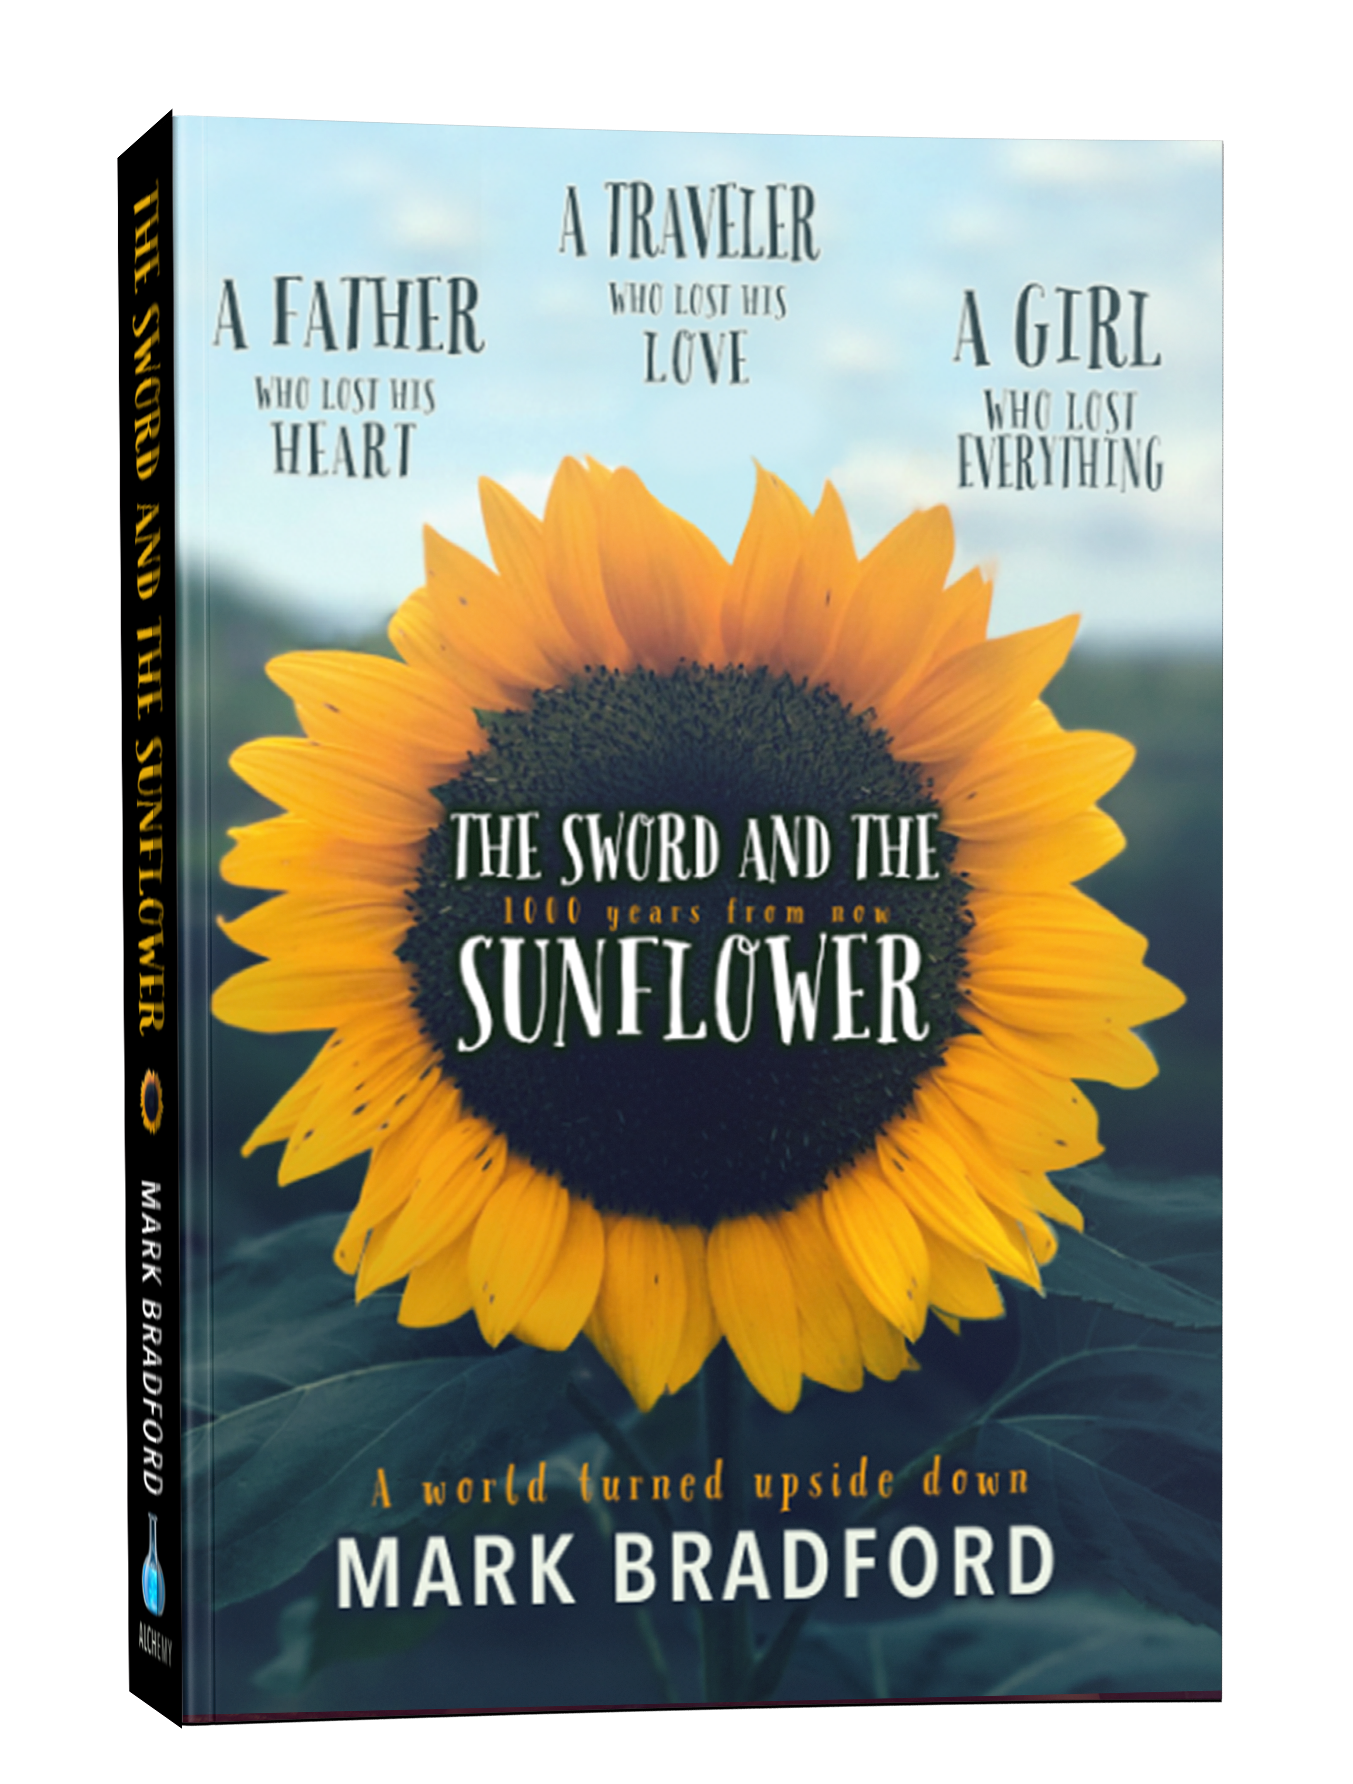 The Sword and the Sunflower